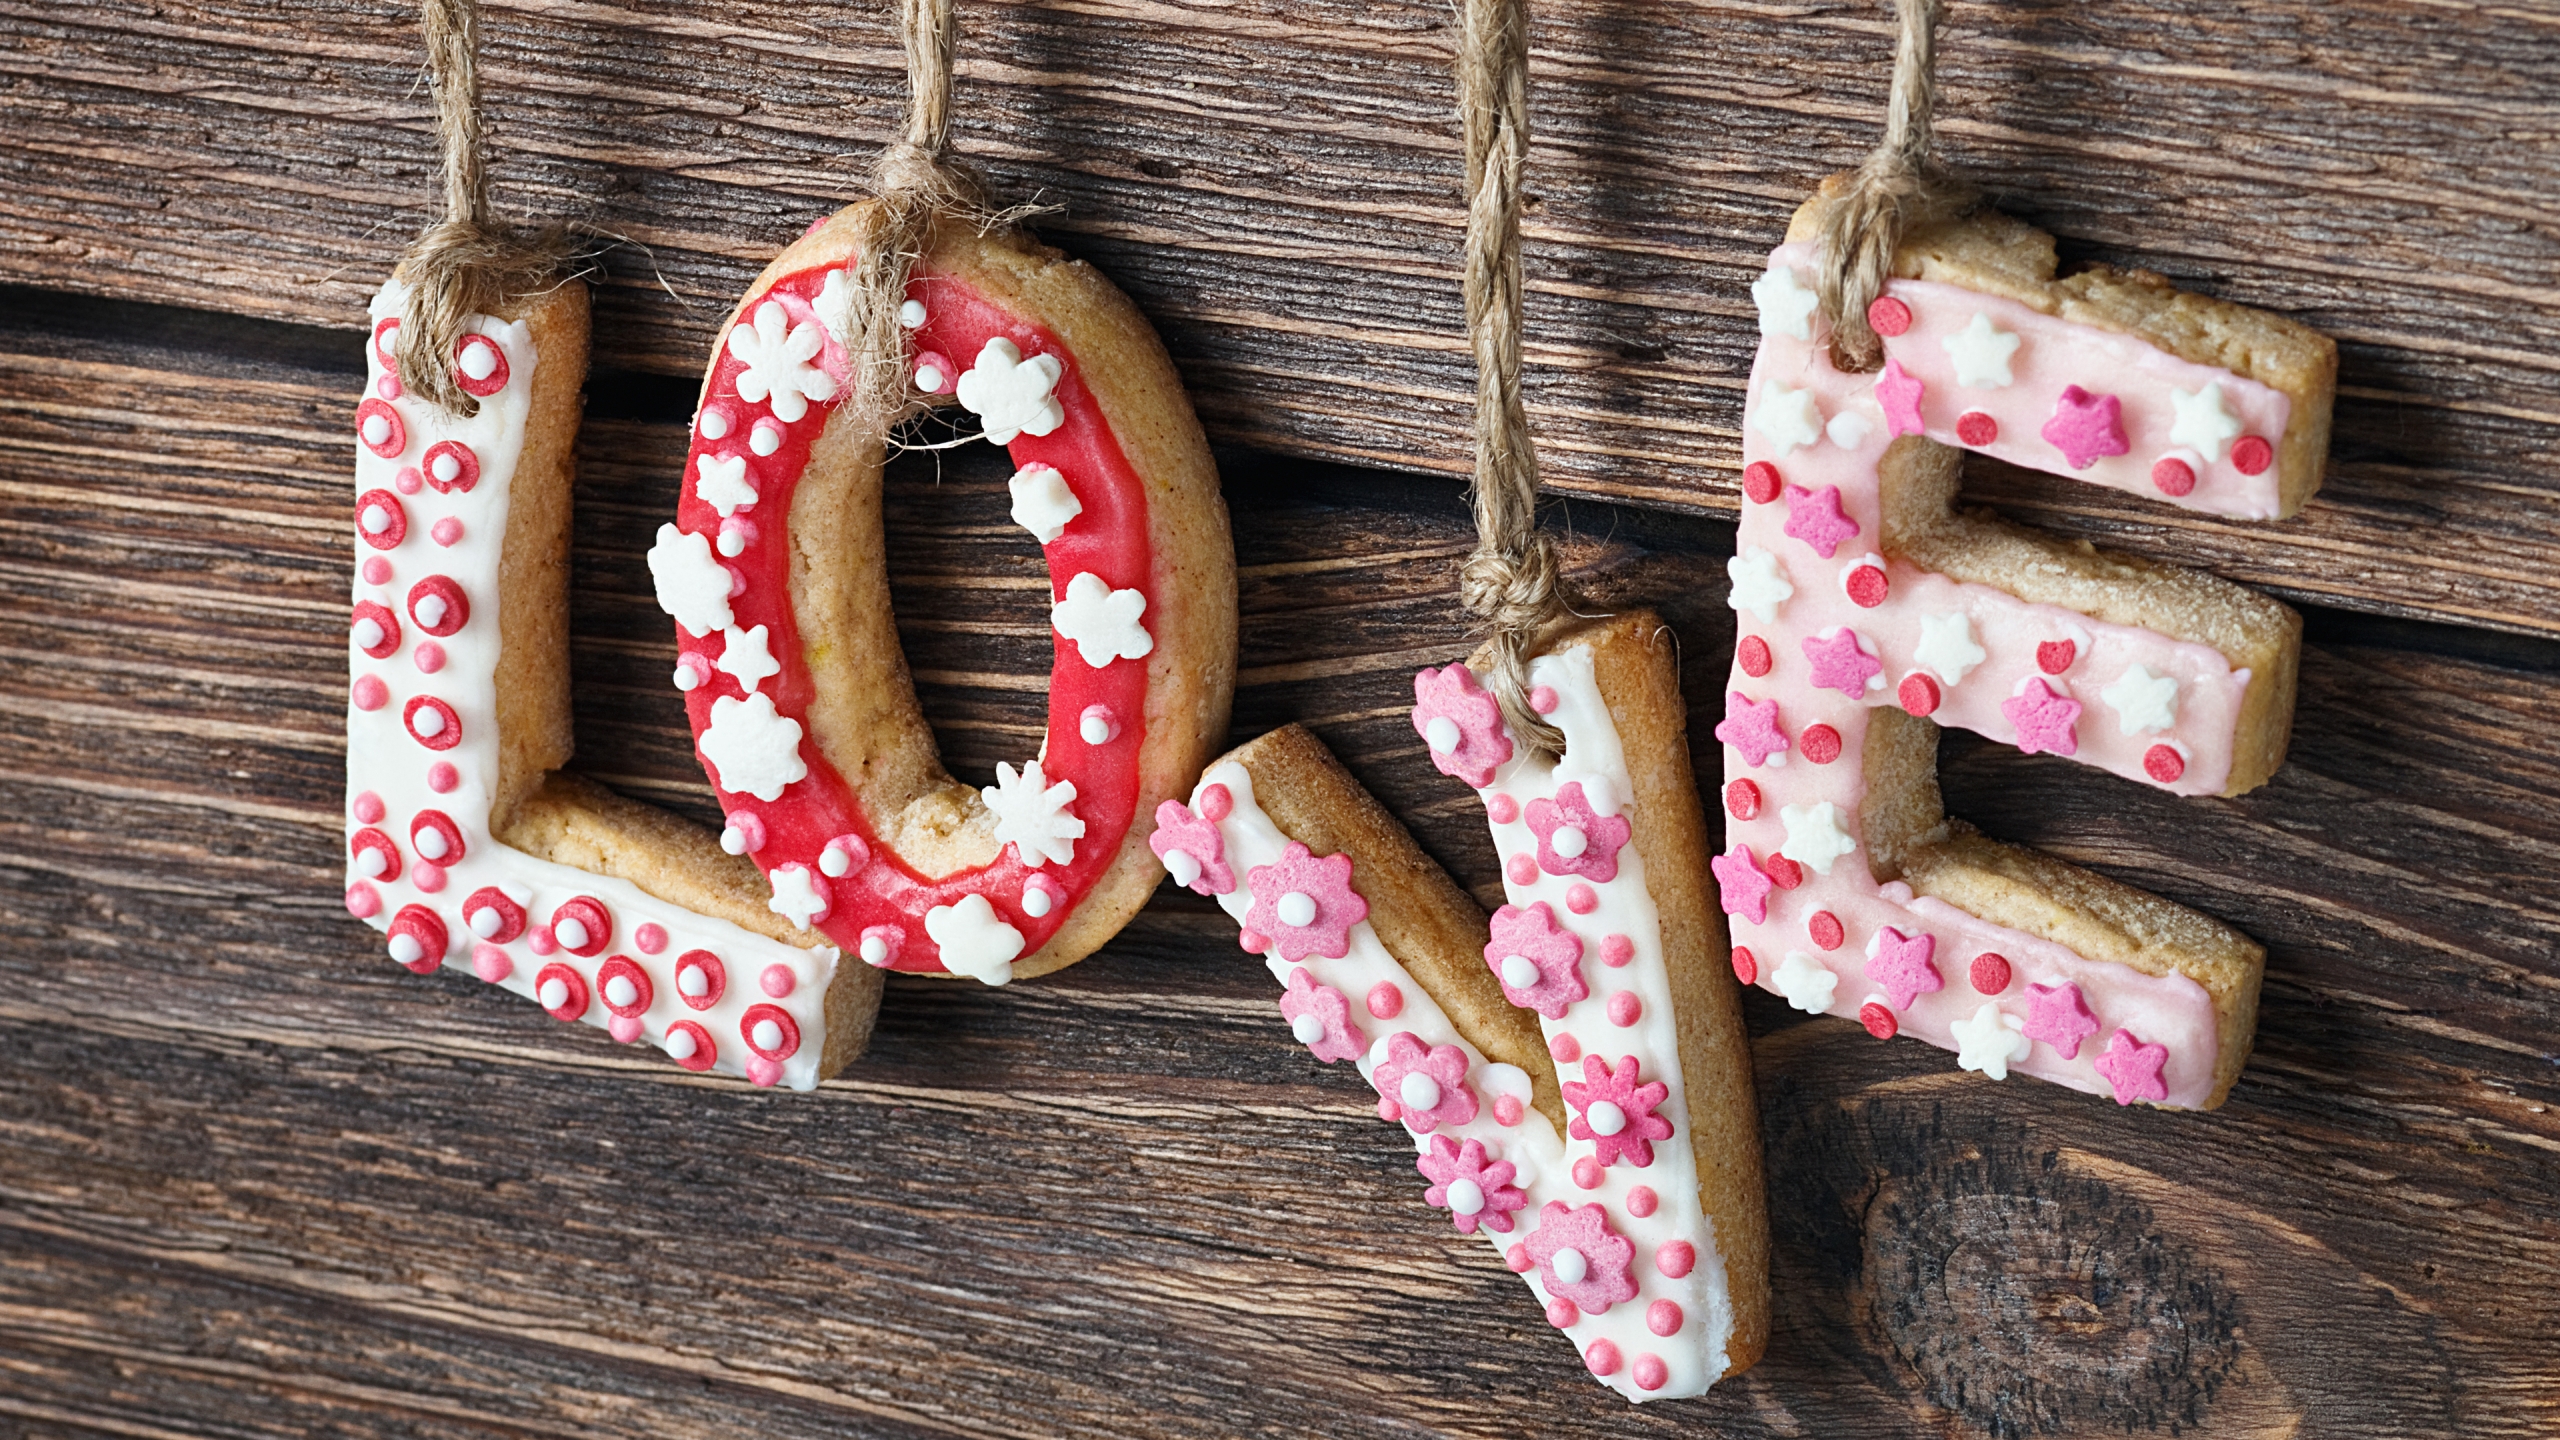 Love Gingerbread Letters for 2560x1440 HDTV resolution